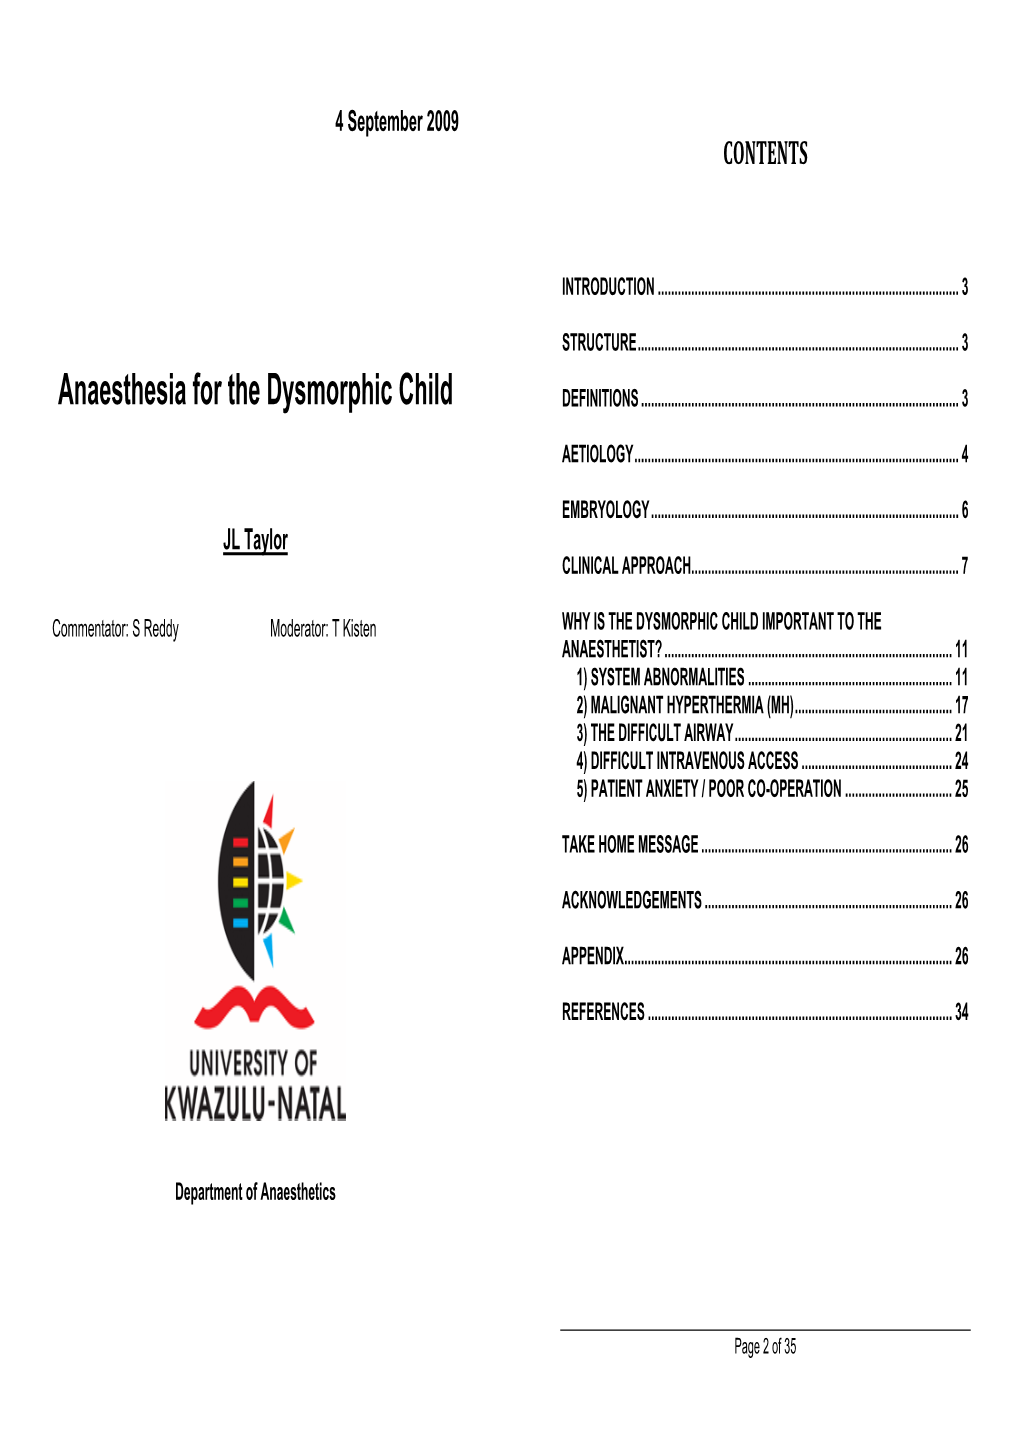 Anaesthesia for the Dysmorphic Child DEFINITIONS